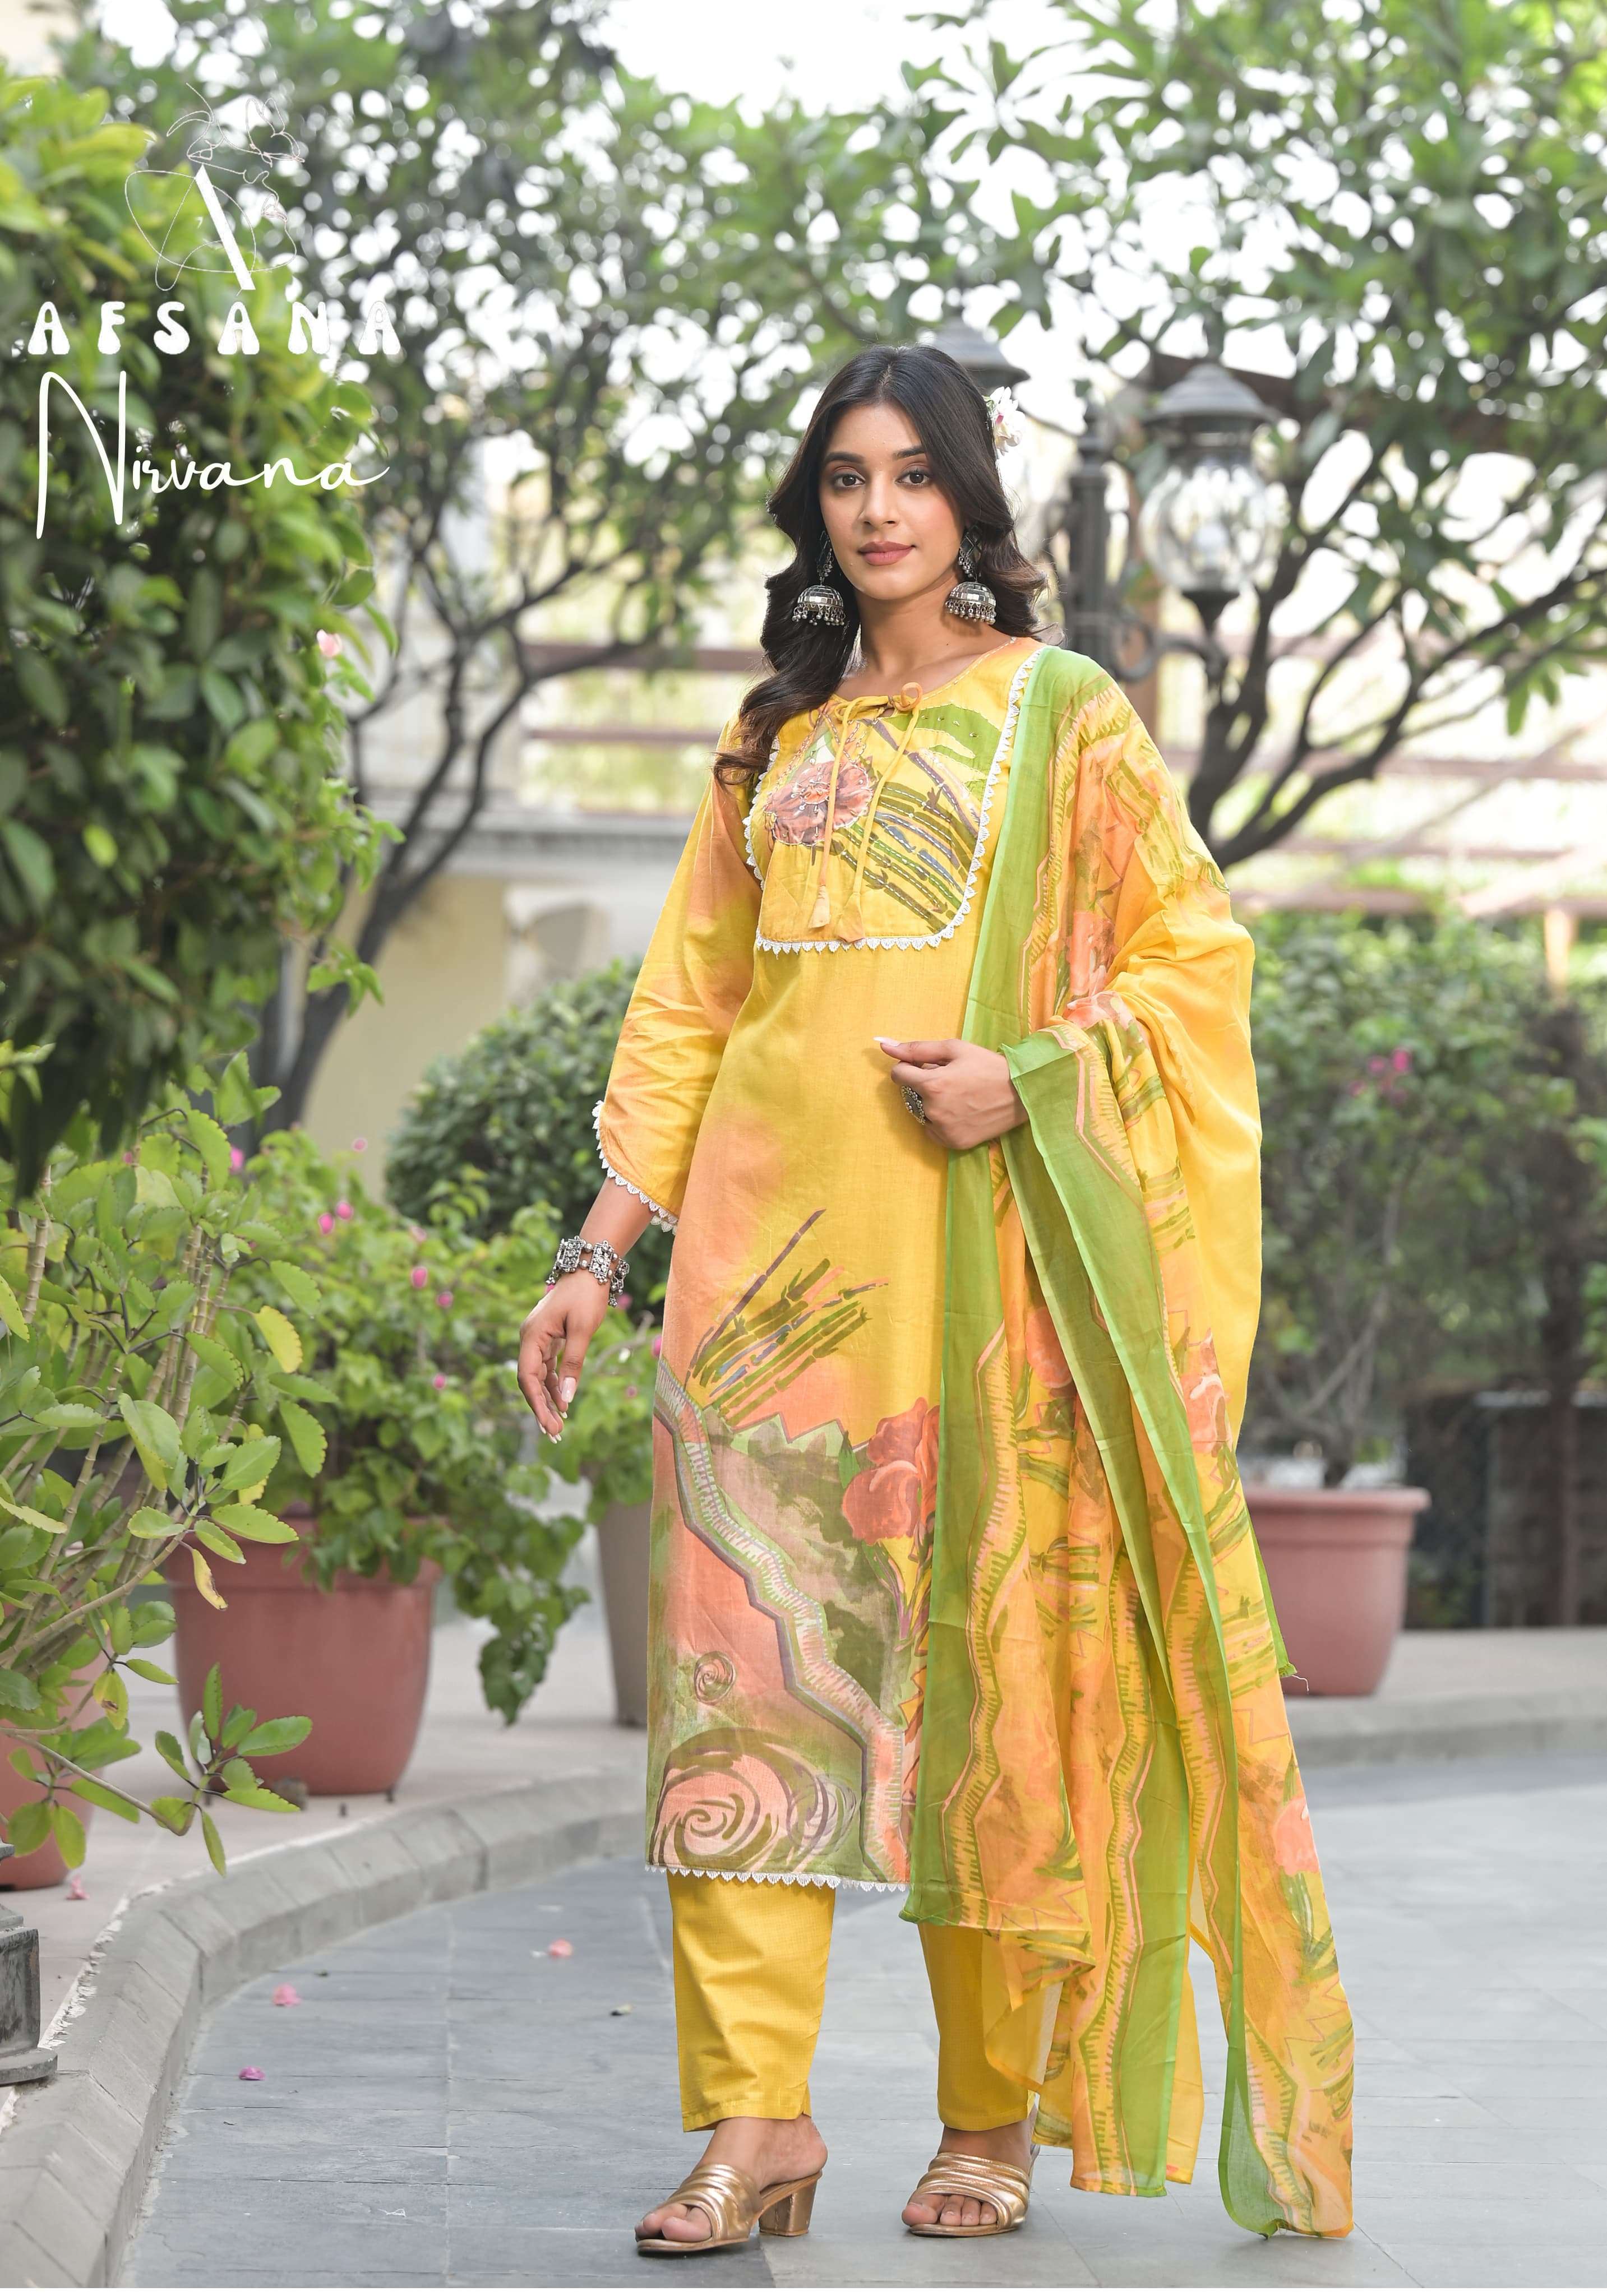 AFSANA NIRWANA CAMBRIC COTTON YELLOW COLOUR READYMADE SUITS ...